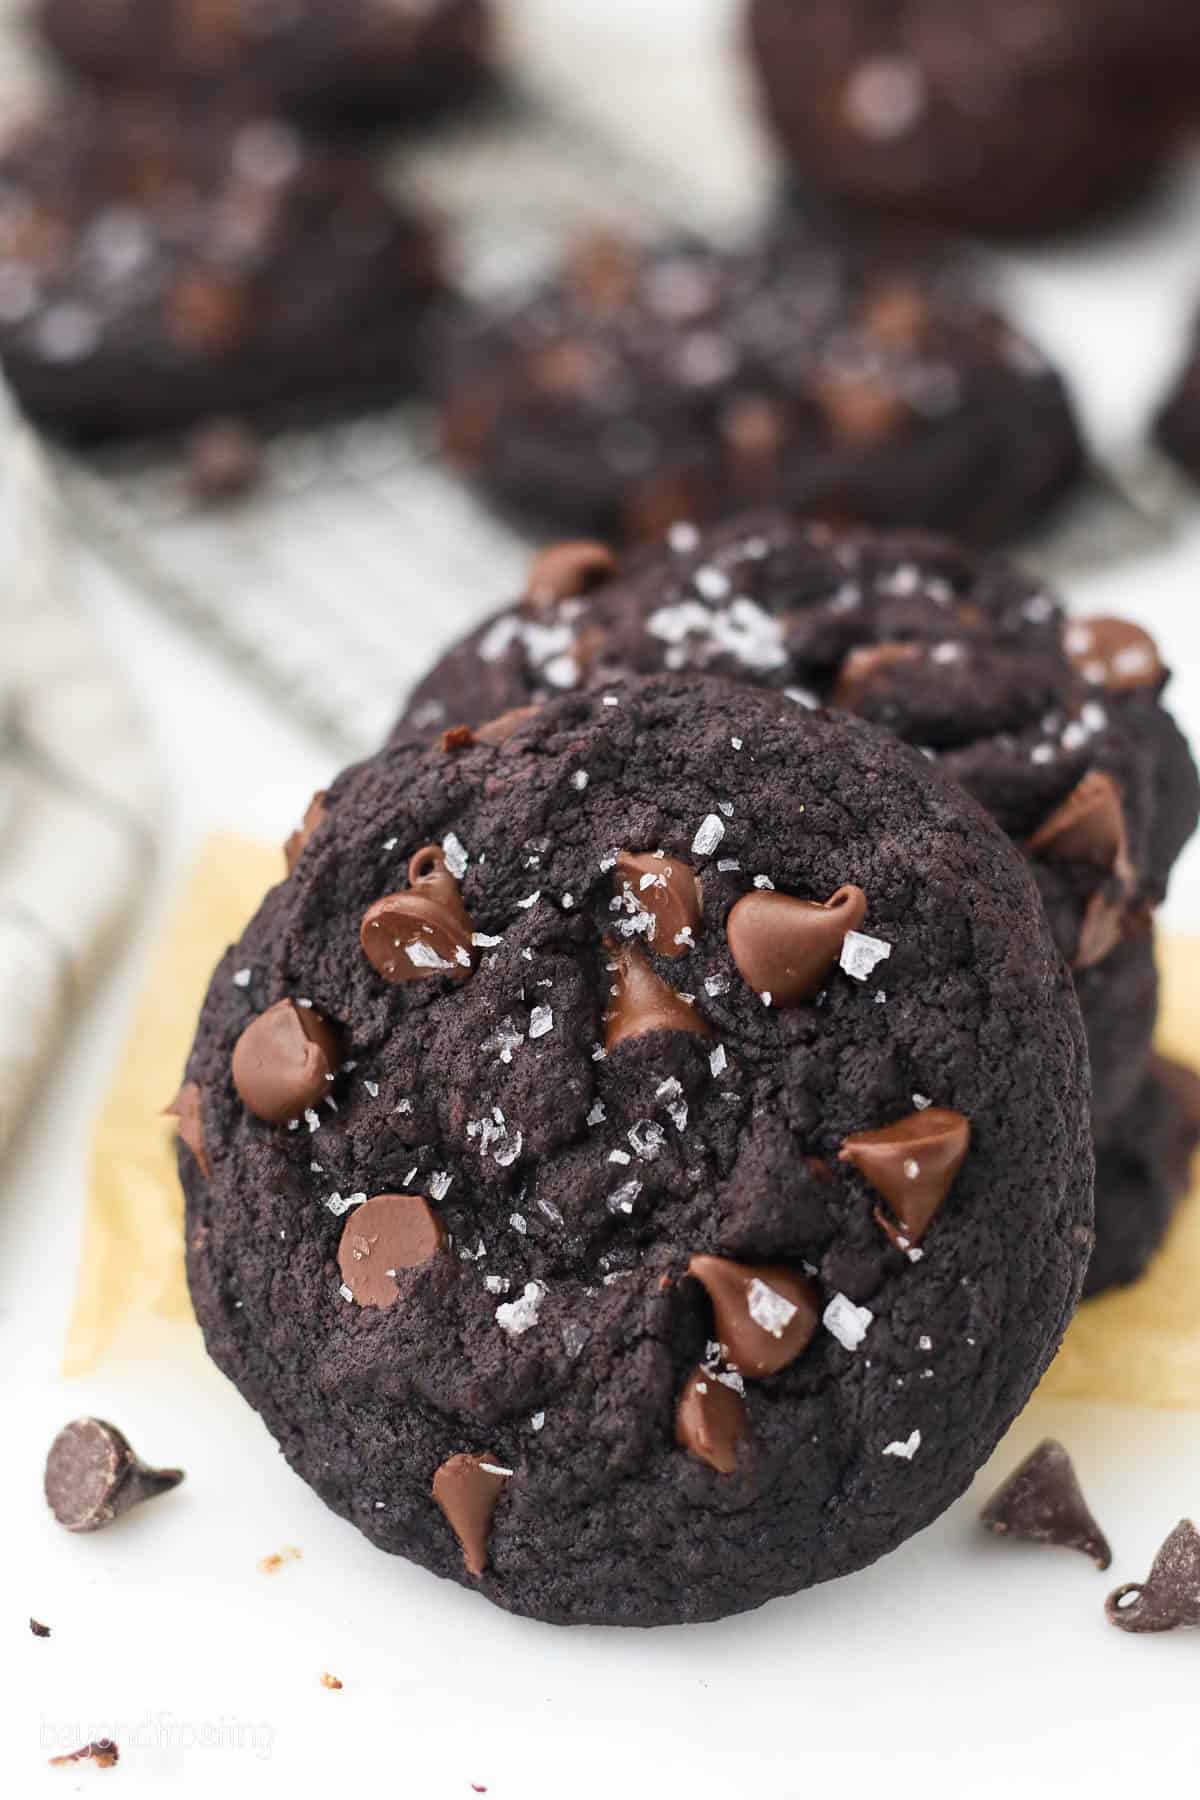 A double chocolate chip cookie leaning against a stack of chocolate cookies, with more cookies in the background.